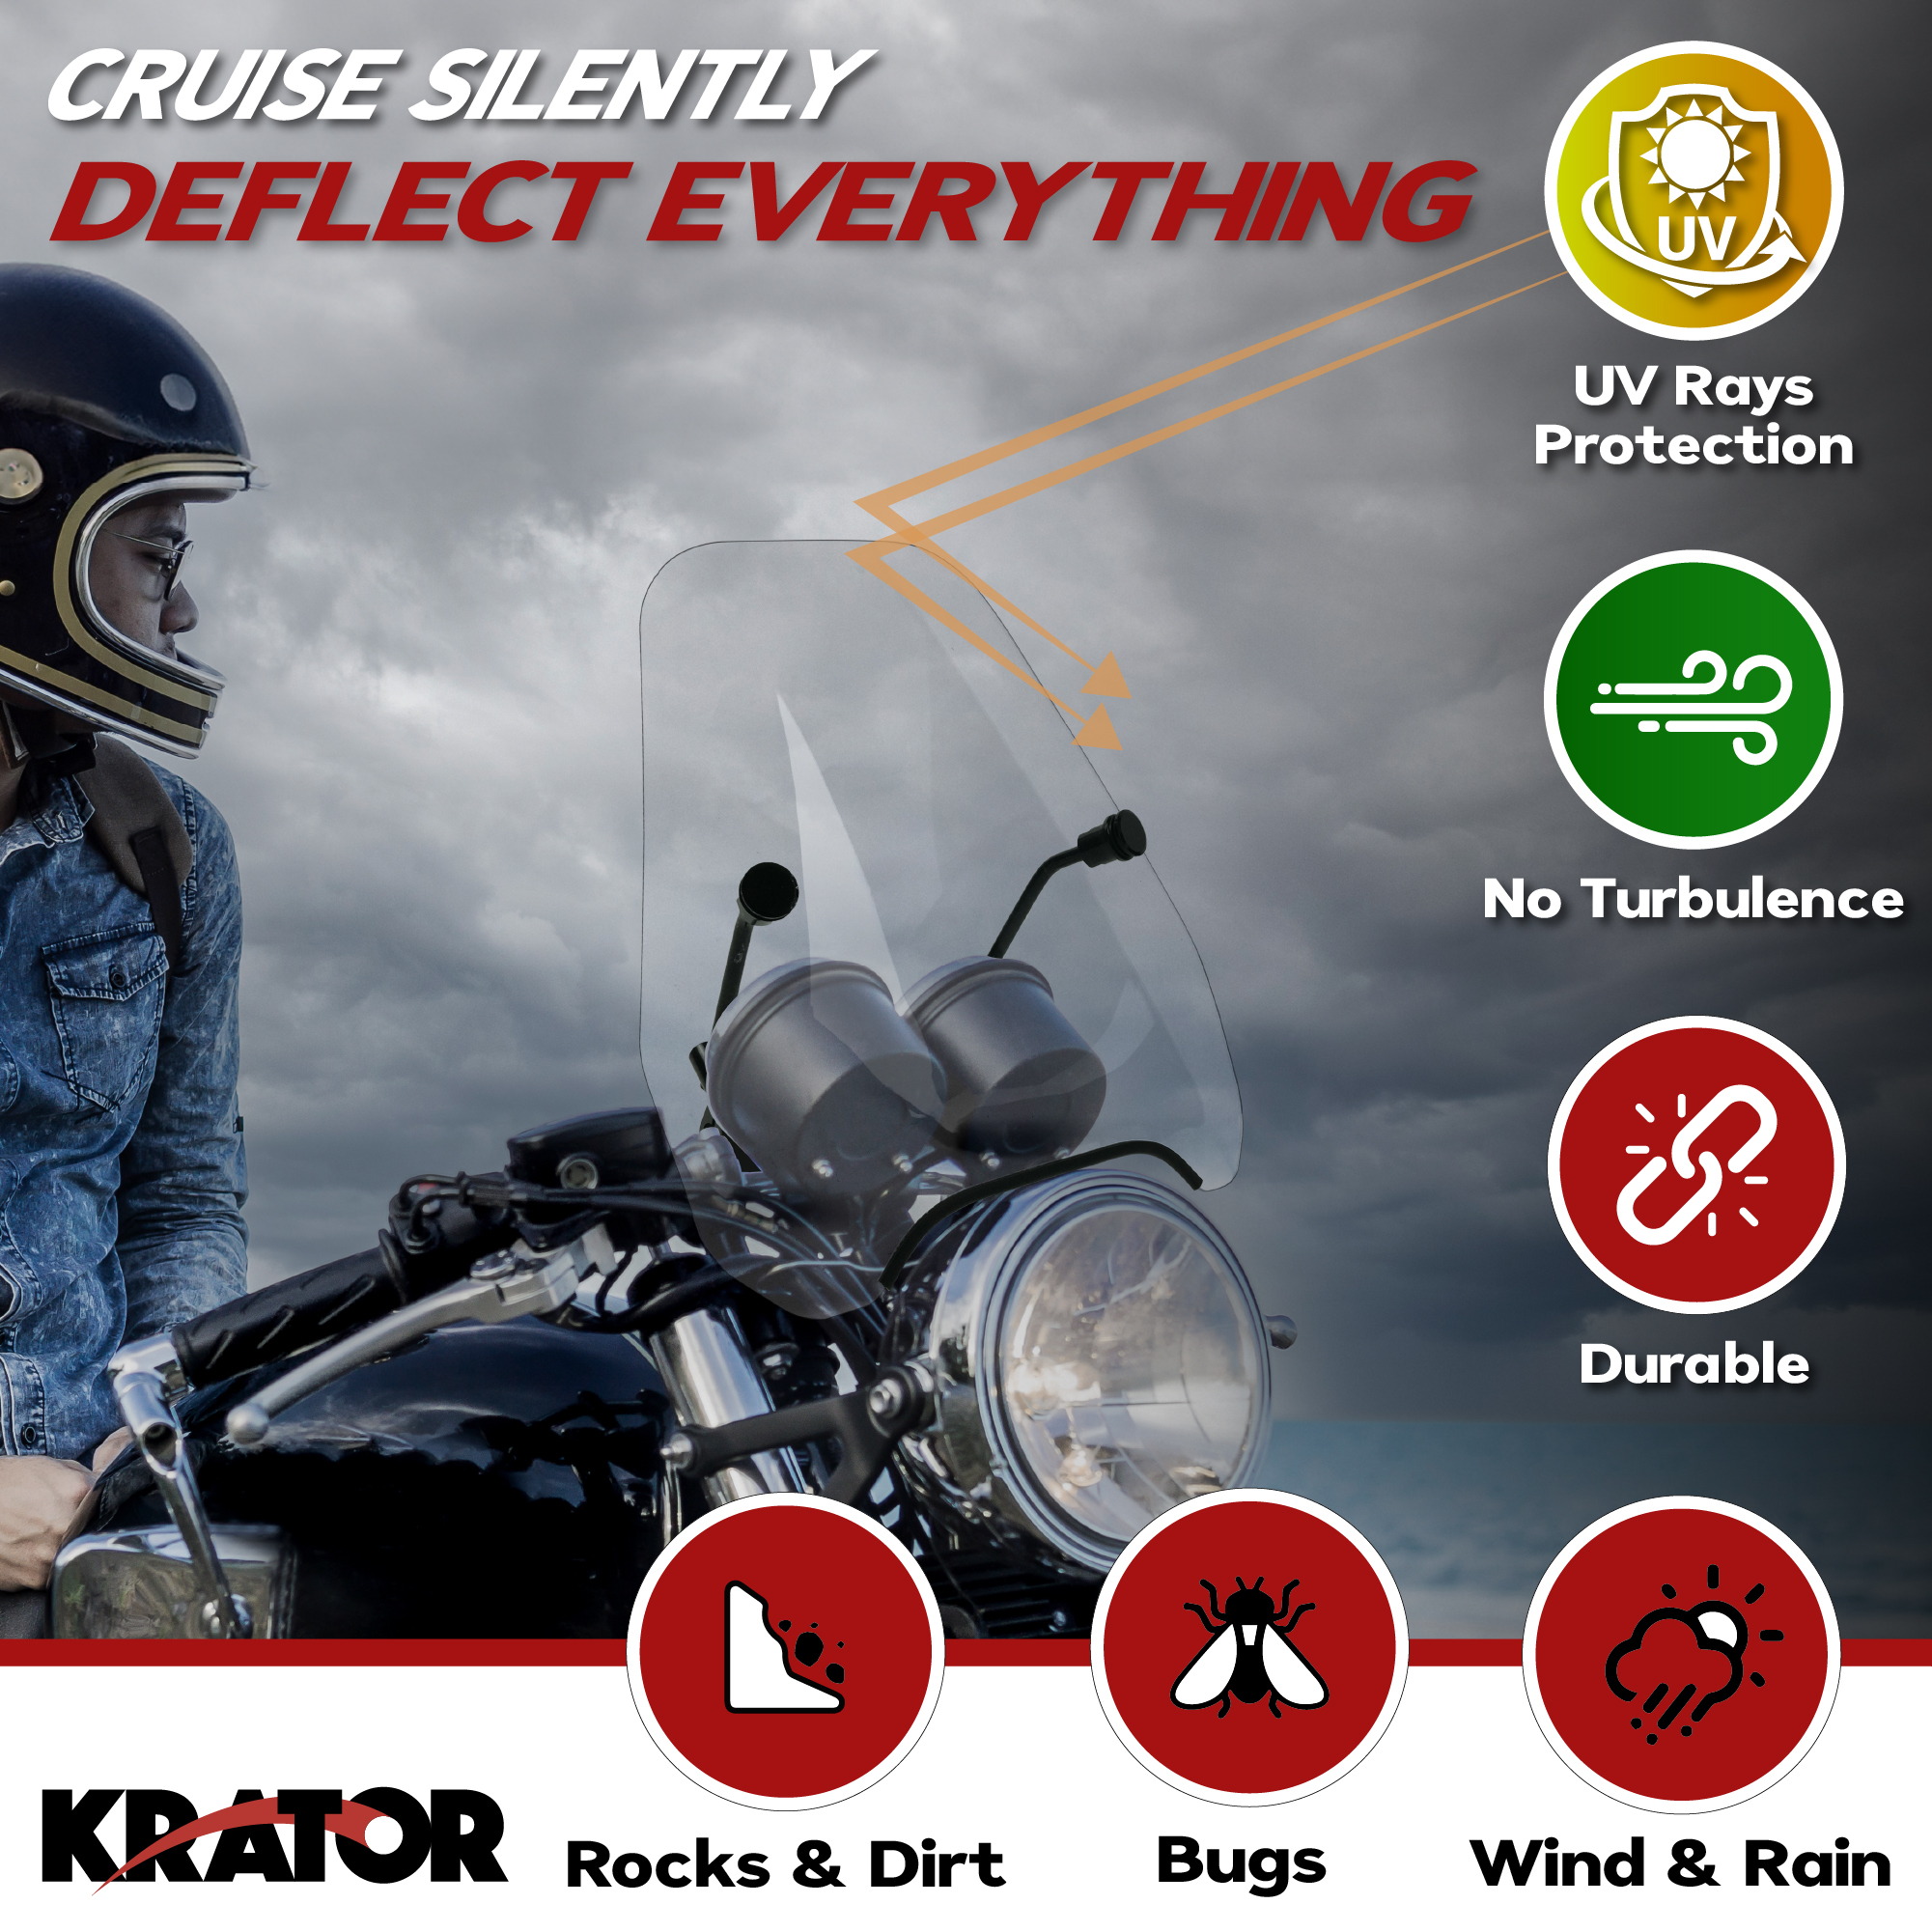 Krator 15" Clear Tinted Windscreen Windshield Compatible with Honda Rebel 500 (2017-2020) Fits 7/8" or 1" Handlebars